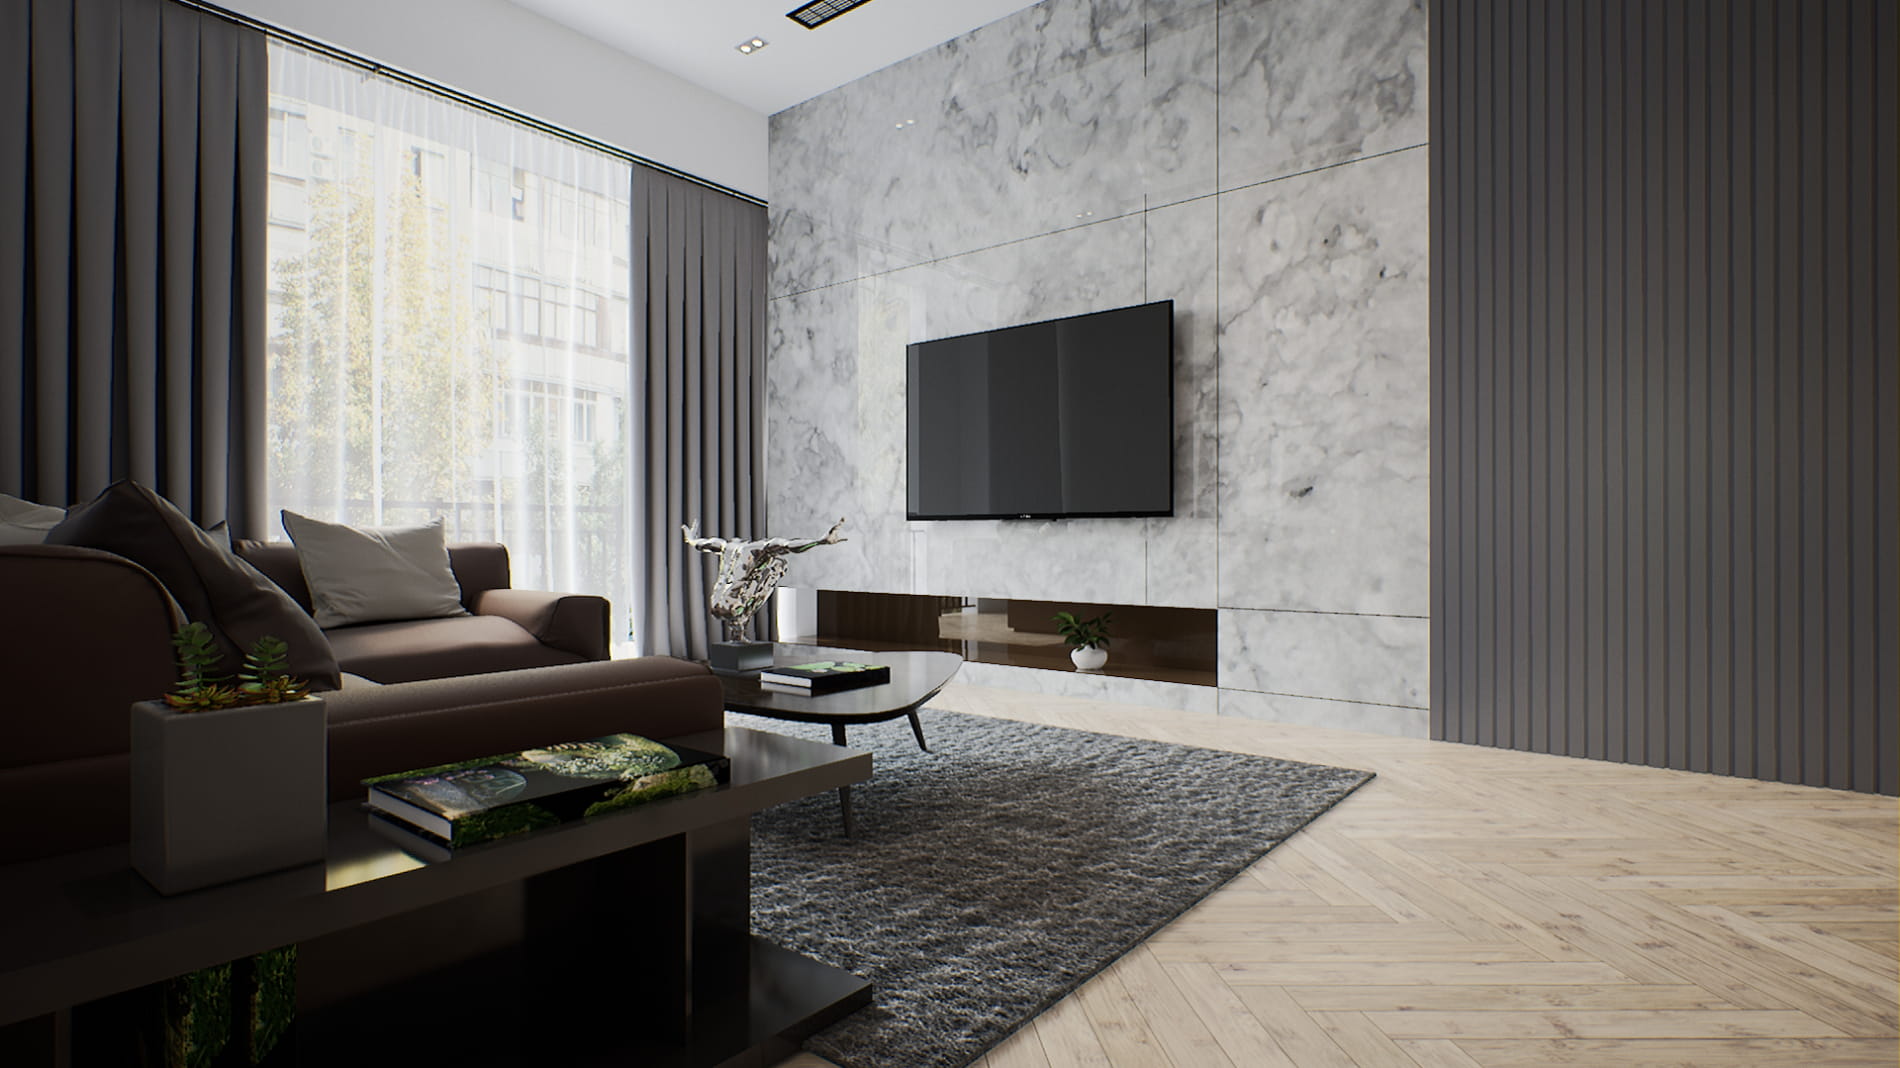 raytraced-interior-cinematic-render-in-unreal-engine-4